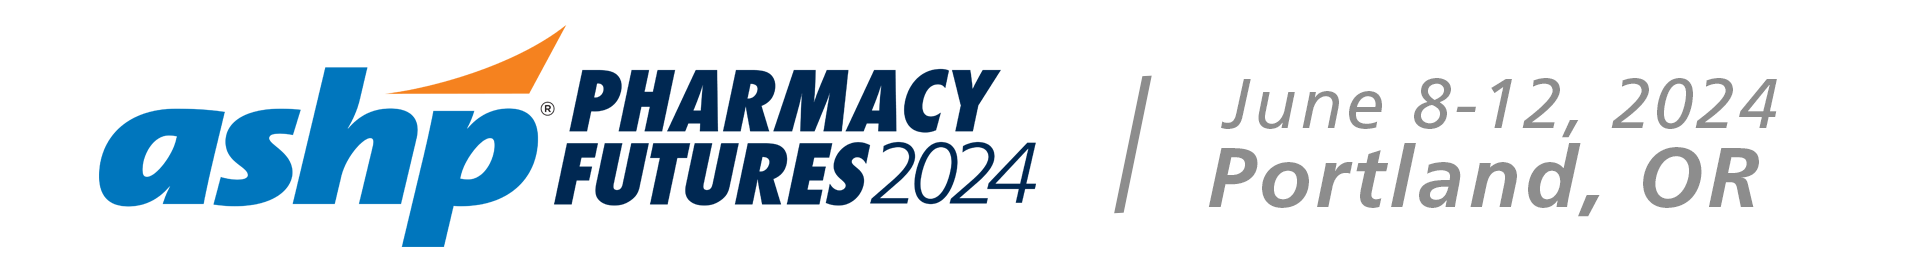 Pharmacy Futures 2024 Event Banner